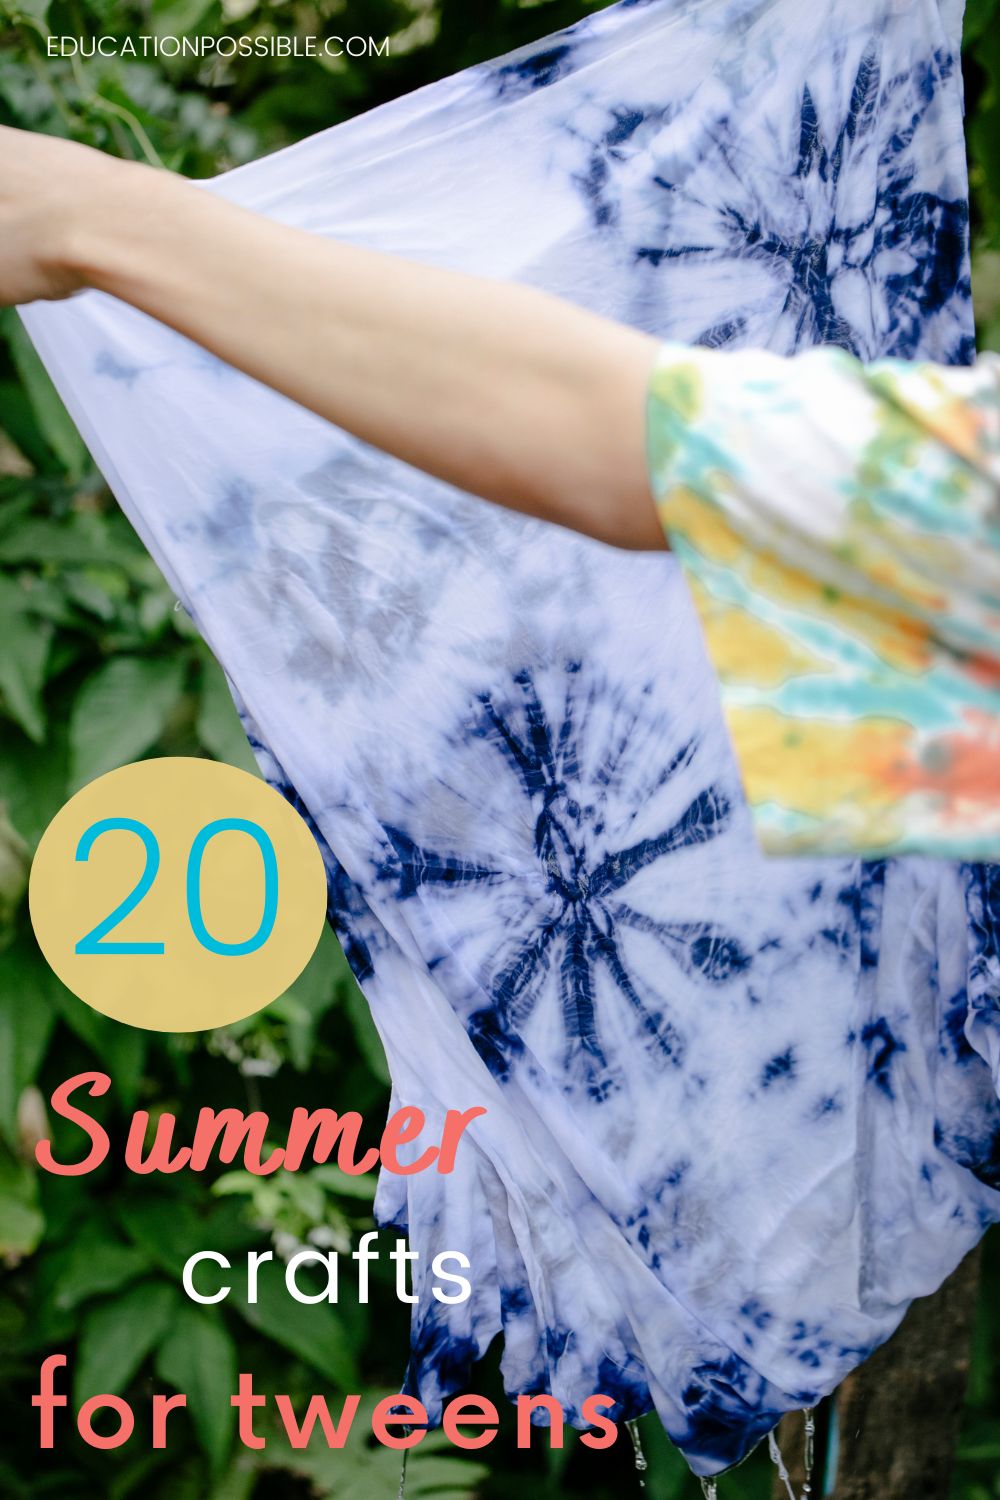 Tween's arm, wearing a blue, yellow, pink tie-dye shirt holding up a blue and white tie-dyed shirt.